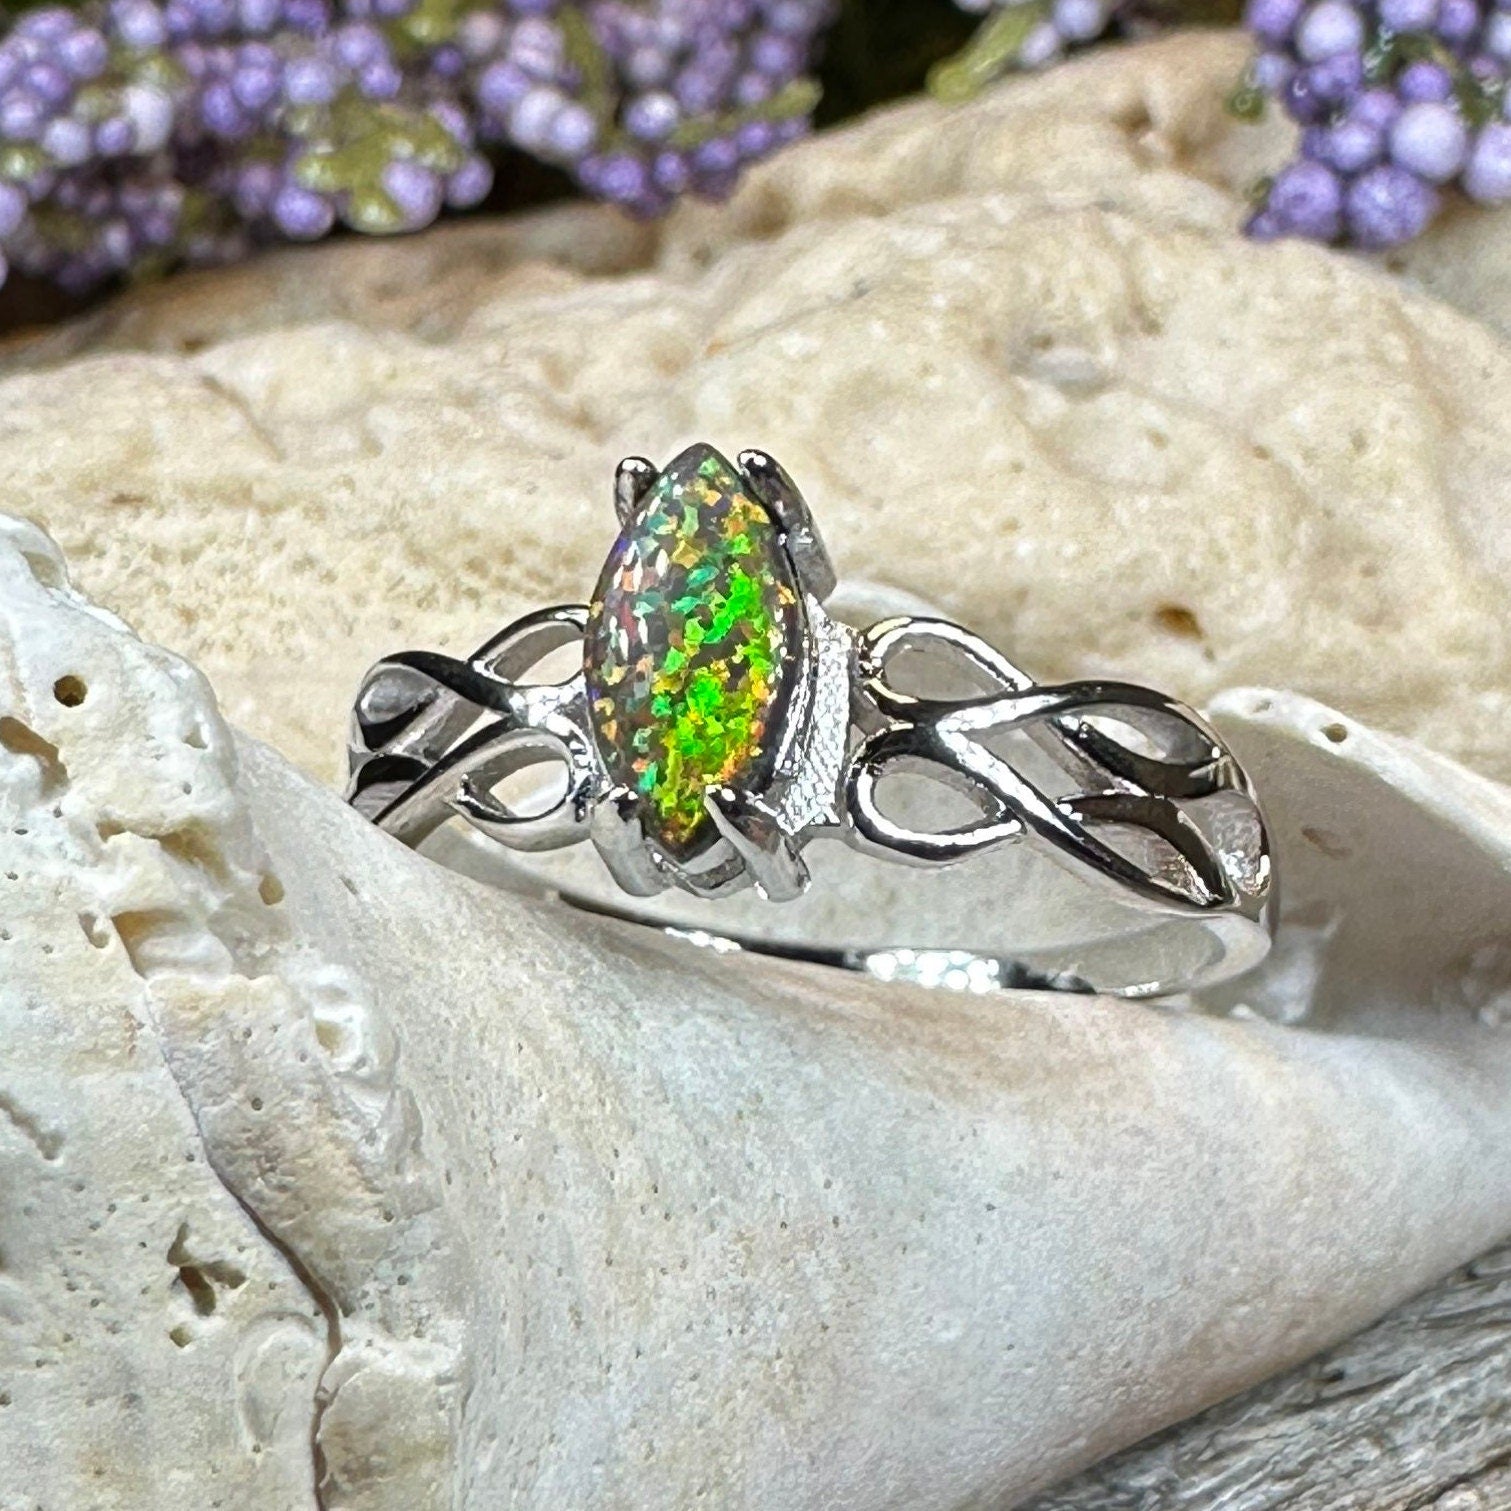 What does water do to opals?